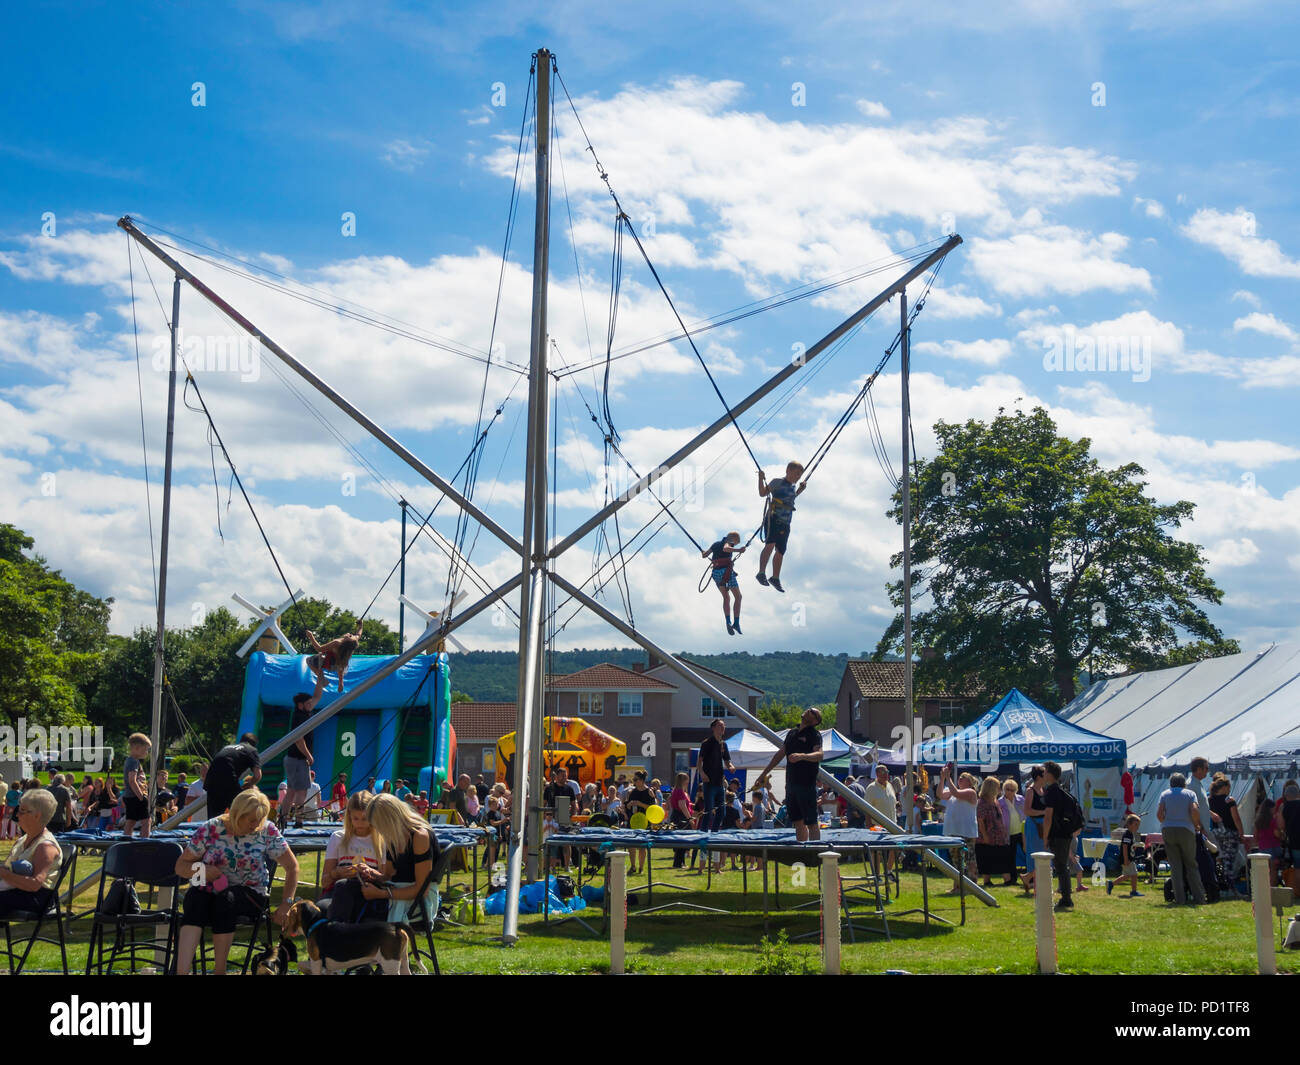 Children on a Bungee Trampolin at a Family Fun Day in North Yorkshire Stock Photo